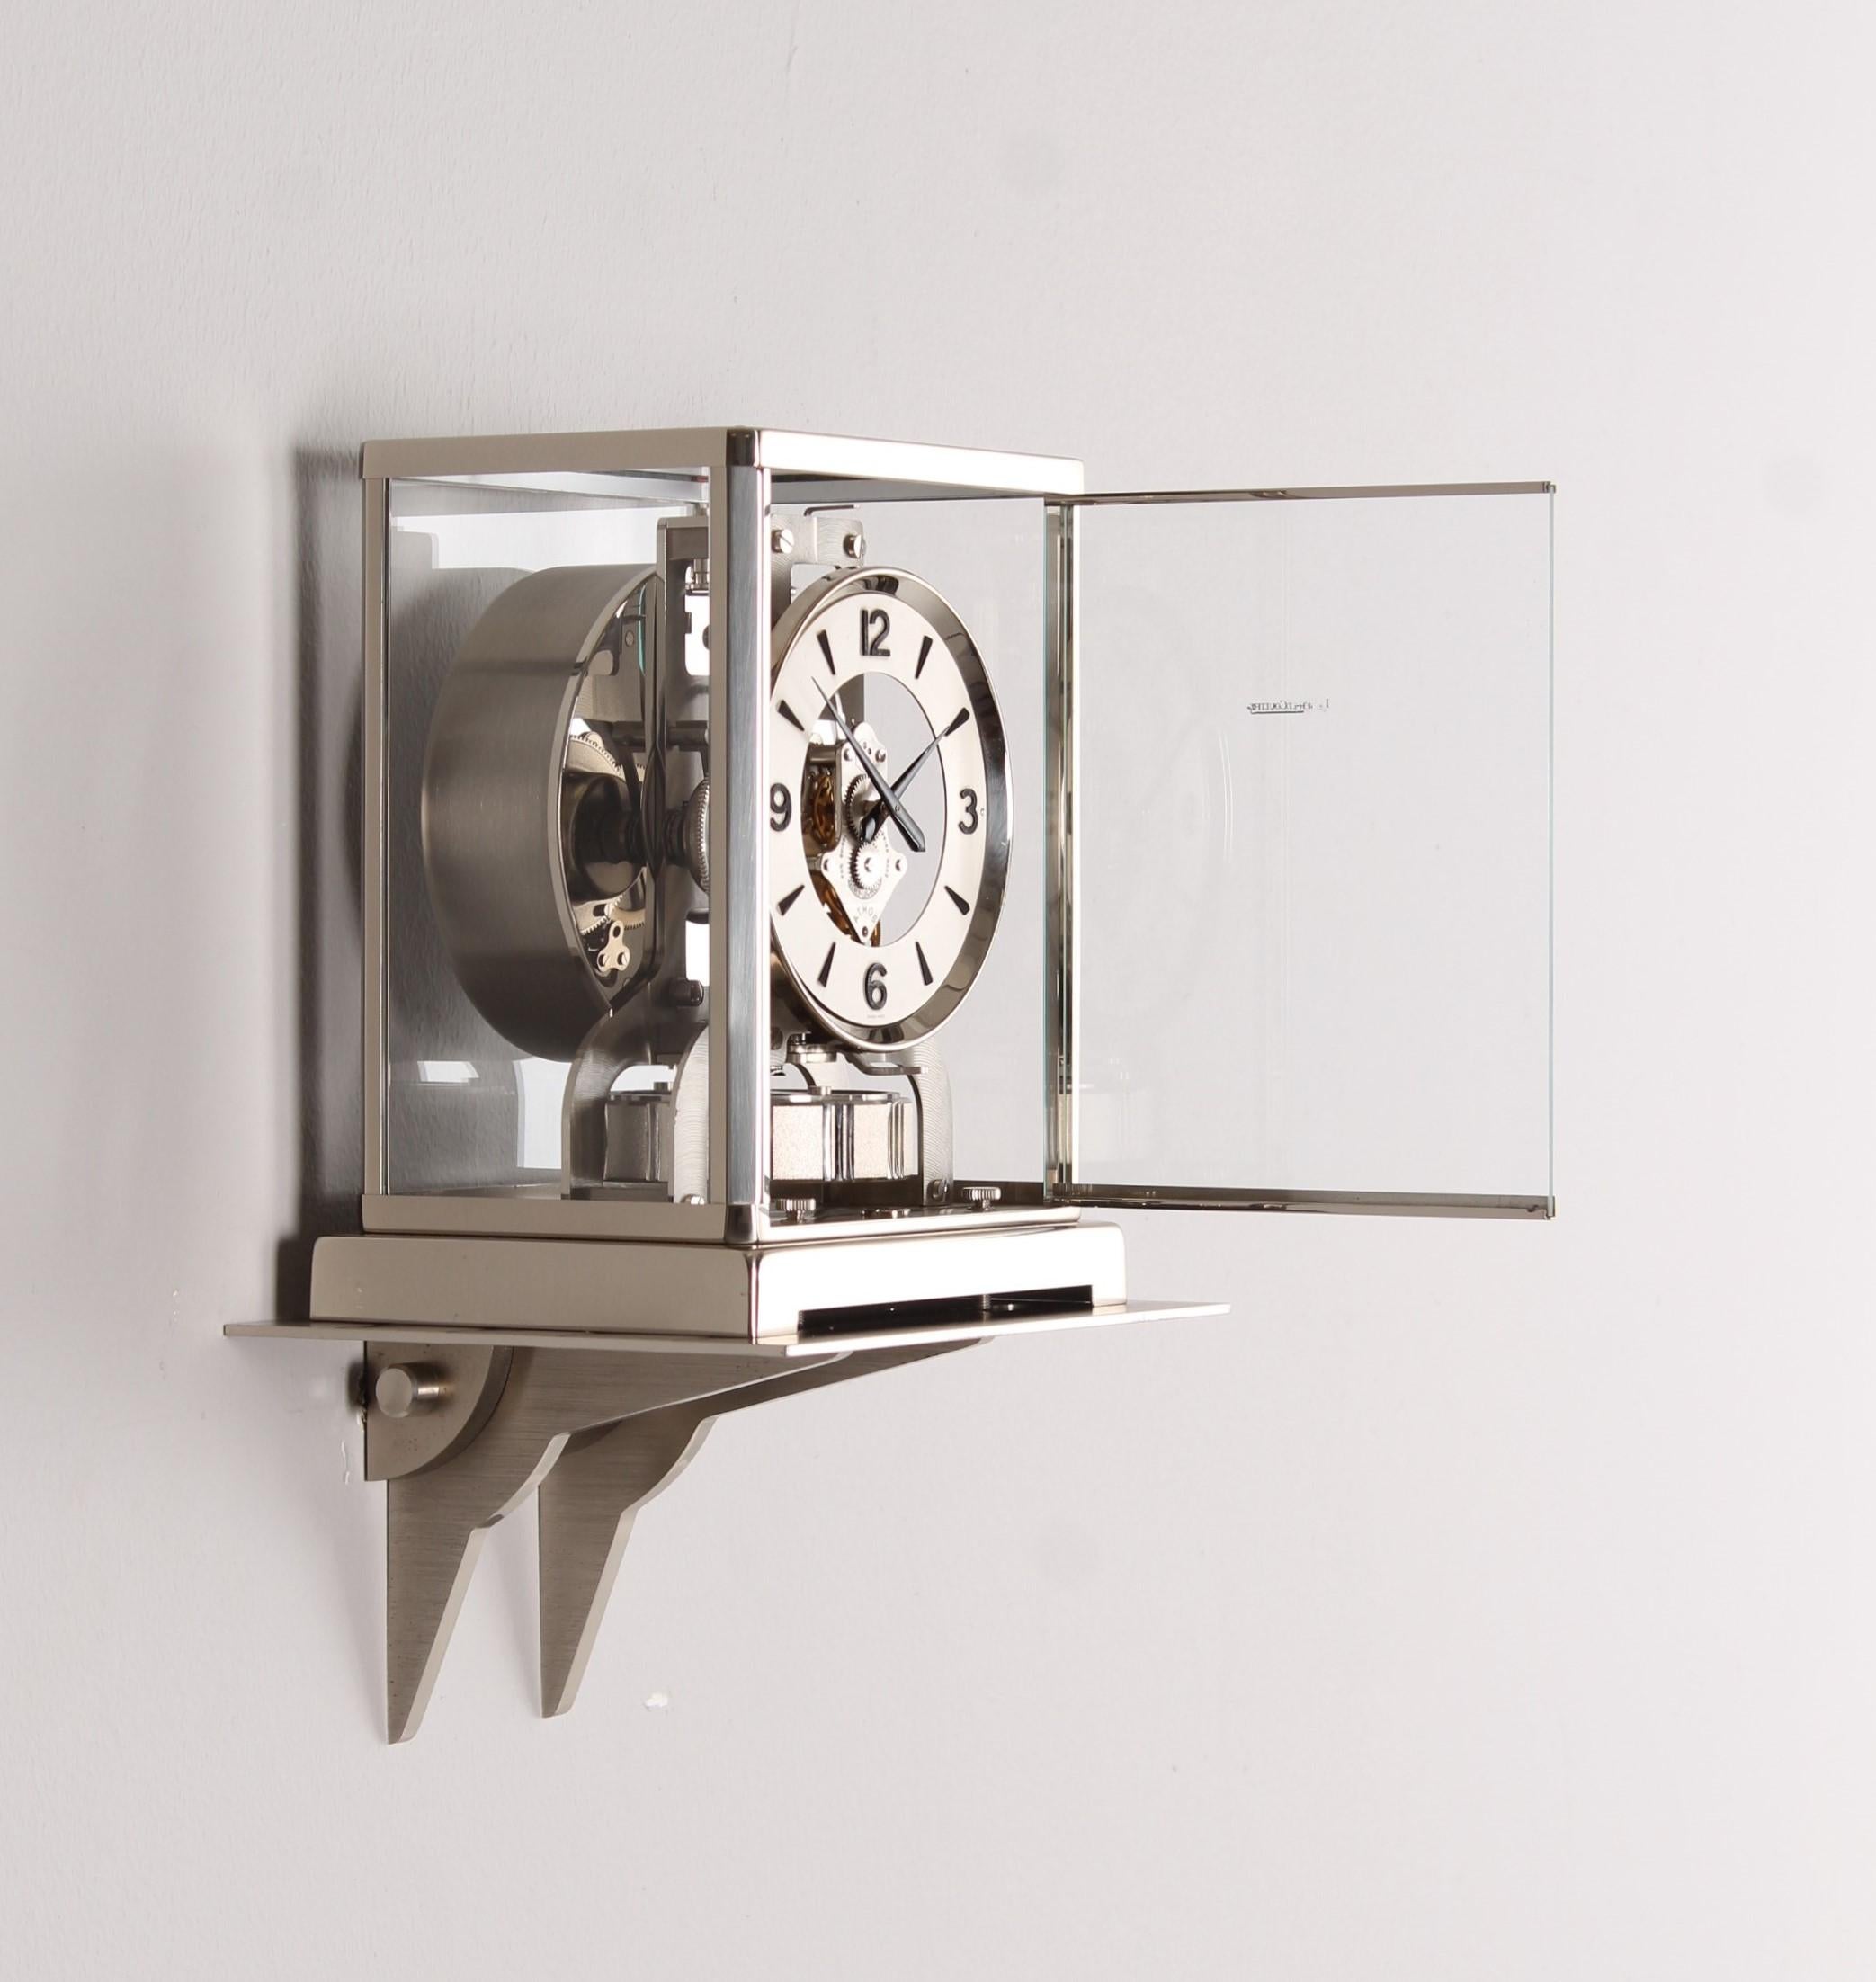 Jaeger LeCoultre, silver Atmos clock with wall console

Switzerland
Nickel-plated brass
Year of manufacture 1972

Dimensions: H x W x D: 22 x 18 x 13.5 cm

Description:
On offer is a super rare All Original White Atmos.
The watch was produced under